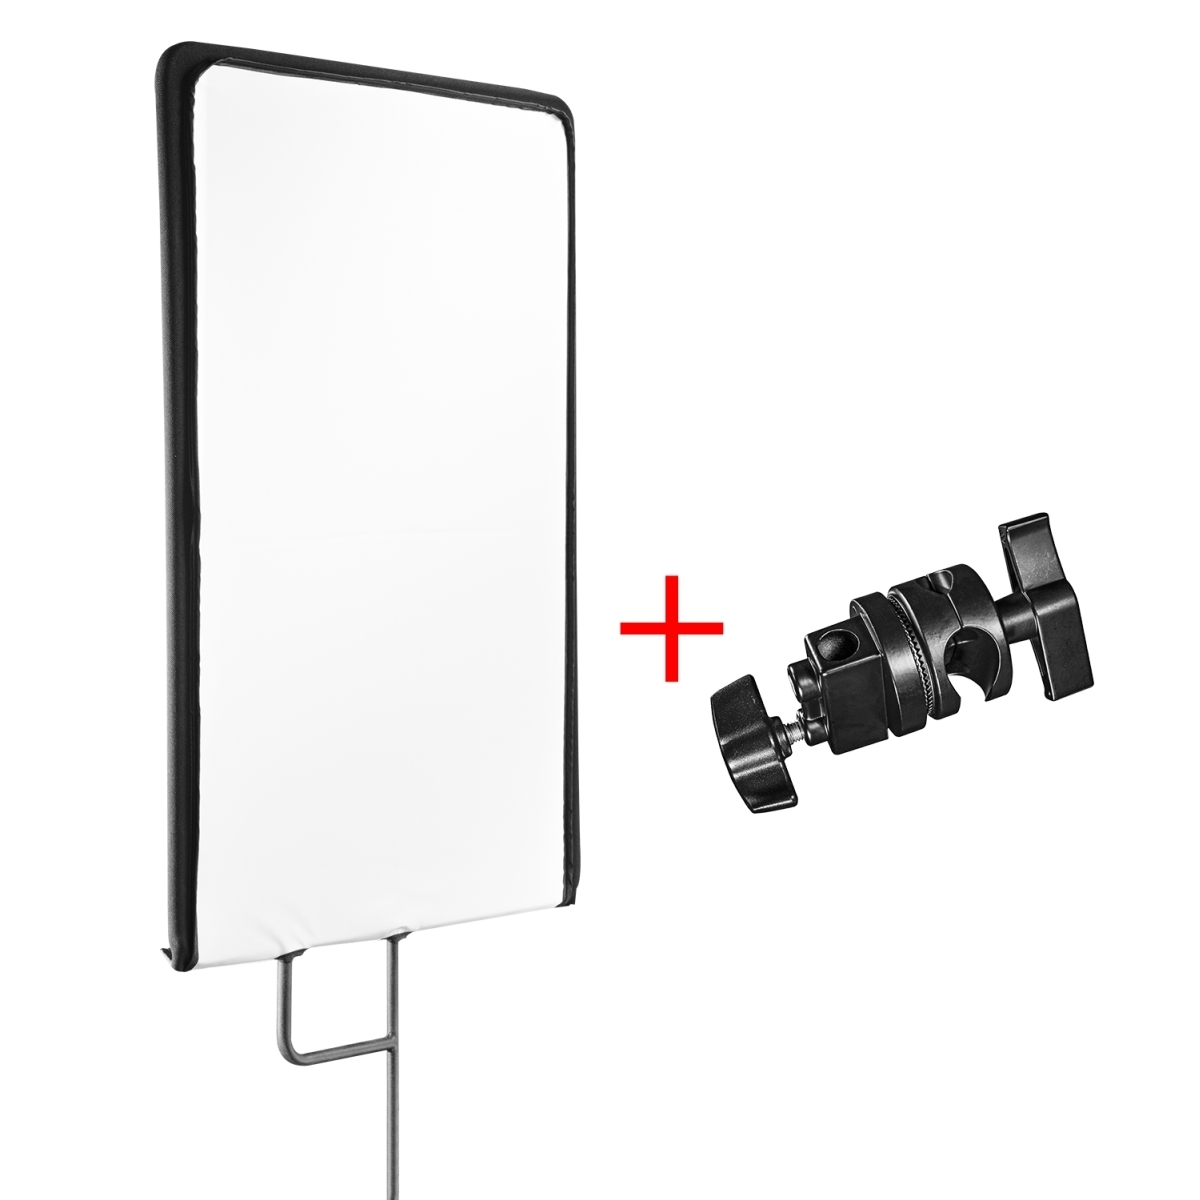 Walimex pro 4in1 Reflector Panel, 75x90cm + clamp